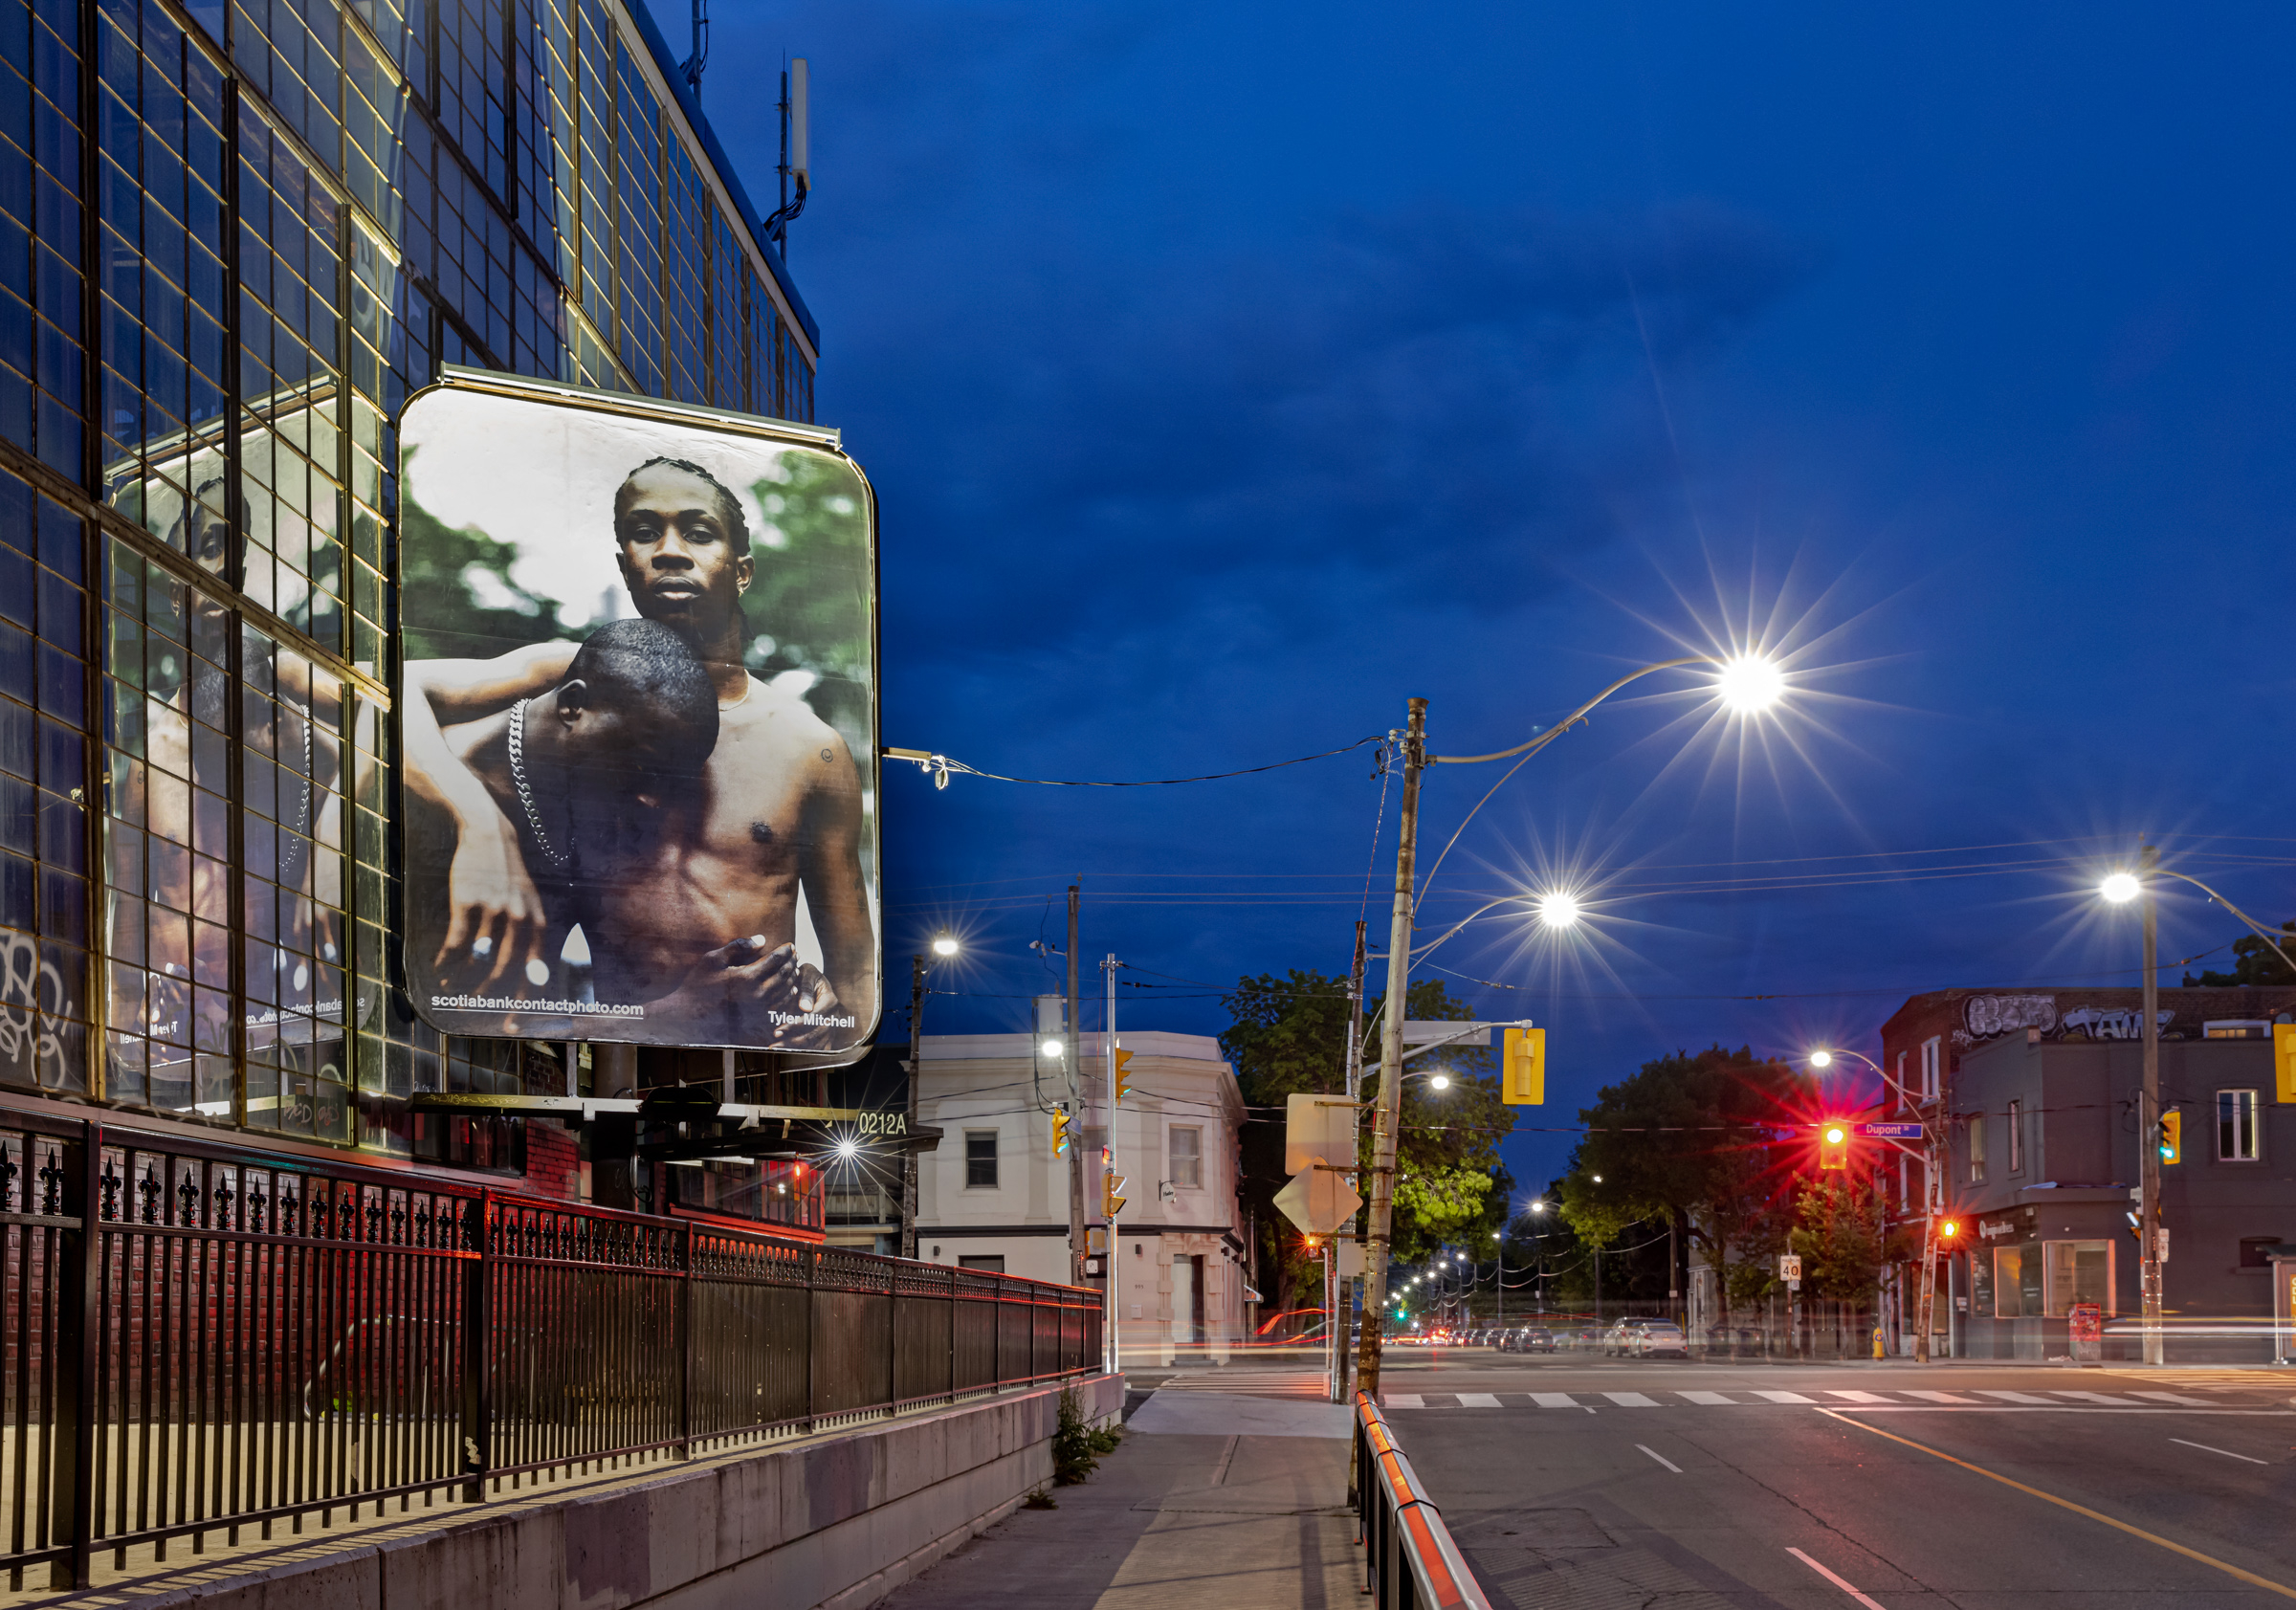     Tyler Mitchell, Cultural Turns, installation on billboards at Dovercourt Ave and Dupont St, Toronto, 2022. © Tyler Mitchell. Courtesy of the artist, Jack Shainman Gallery, New York, and CONTACT. Photo: Toni Hafkenscheid

